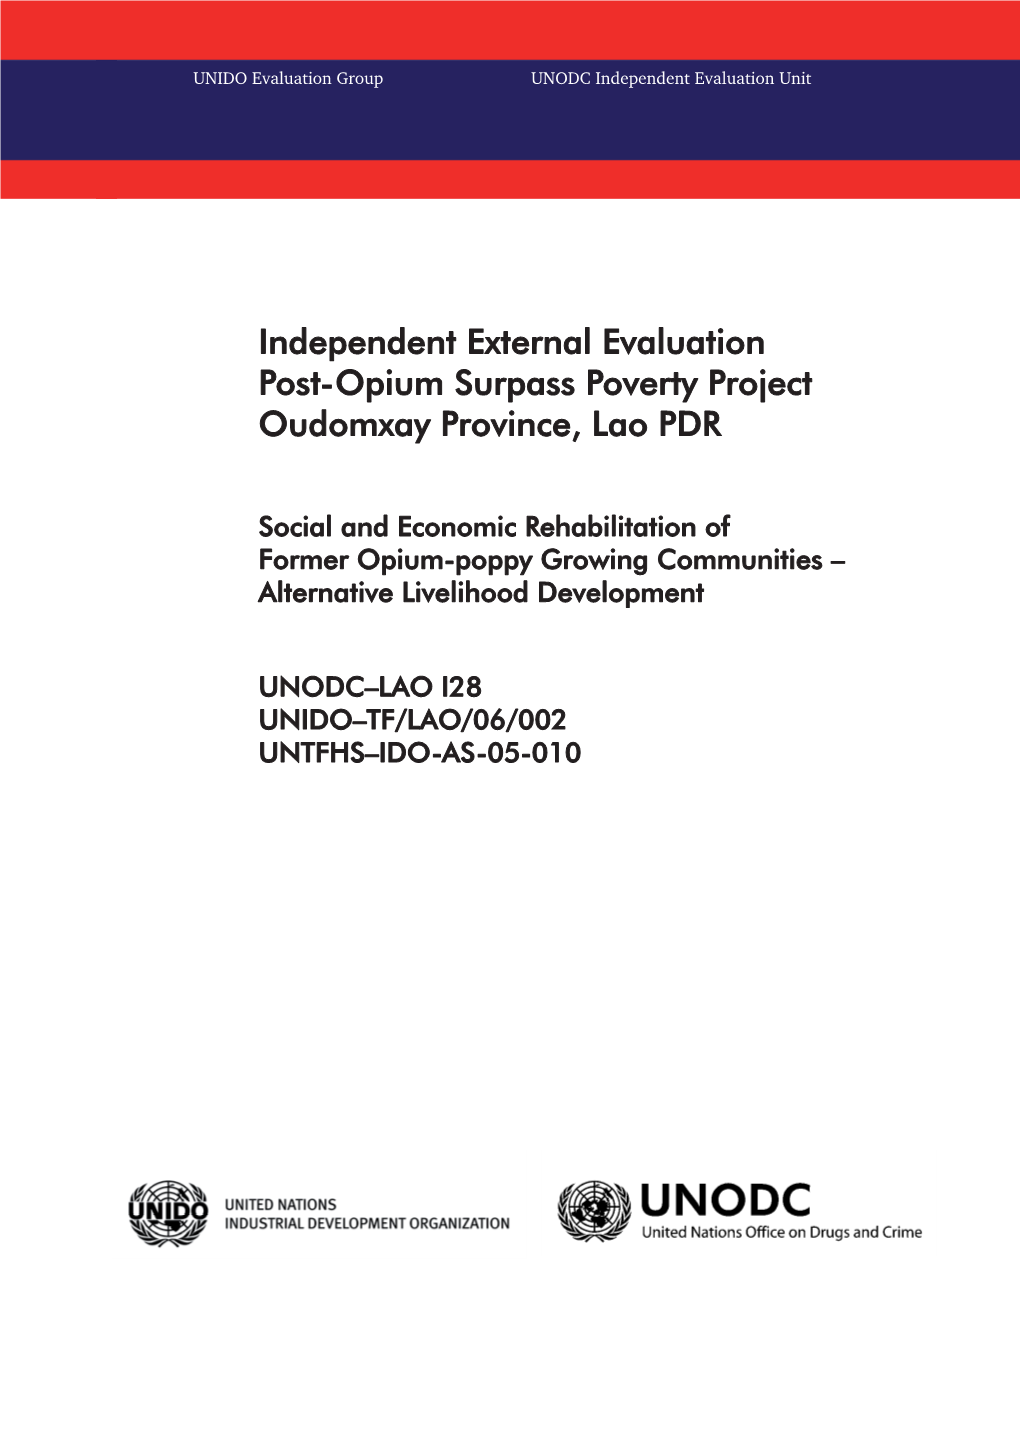 Independent External Evaluation Post-Opium Surpass Poverty Project Oudomxay Province, Lao PDR